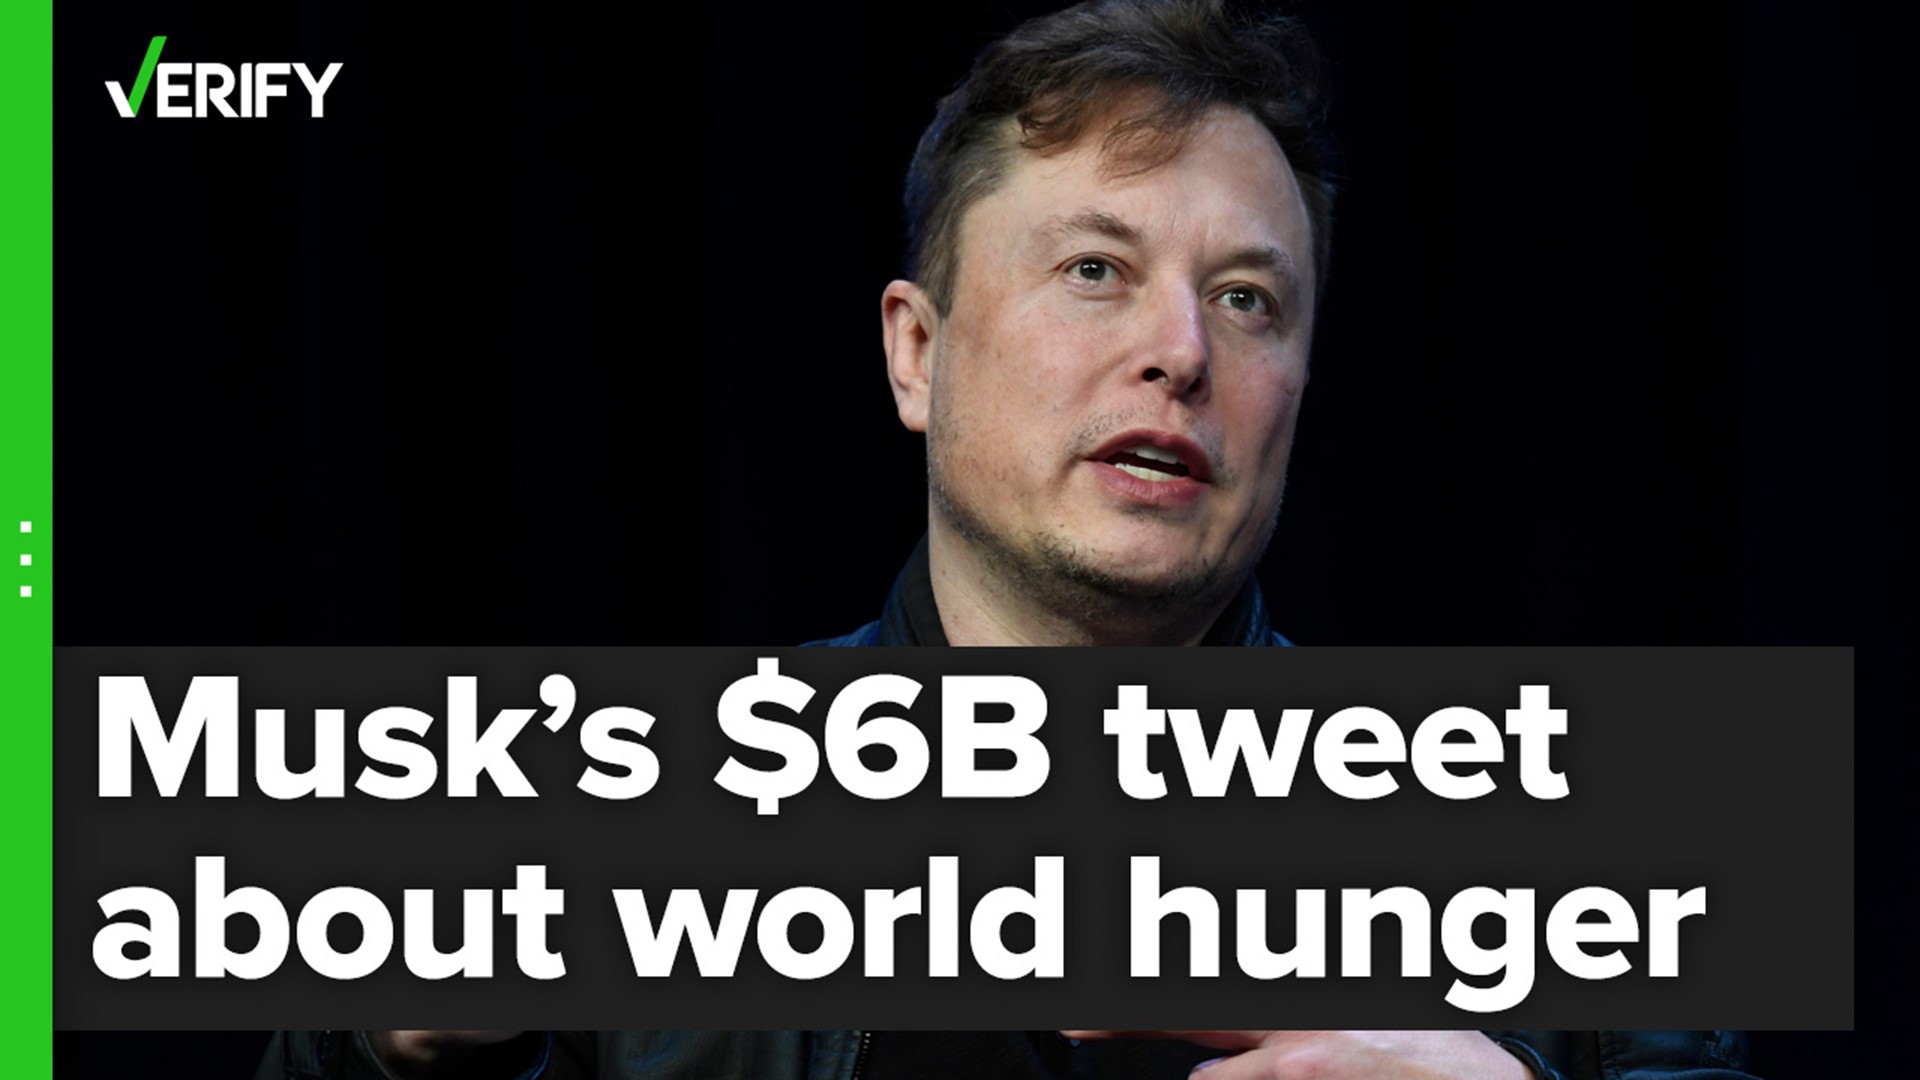 In 2021 Musk told the UN's World Food Programme that he would donate $6B to solve world hunger if they could share a plan on how they’d spend the money. They did.